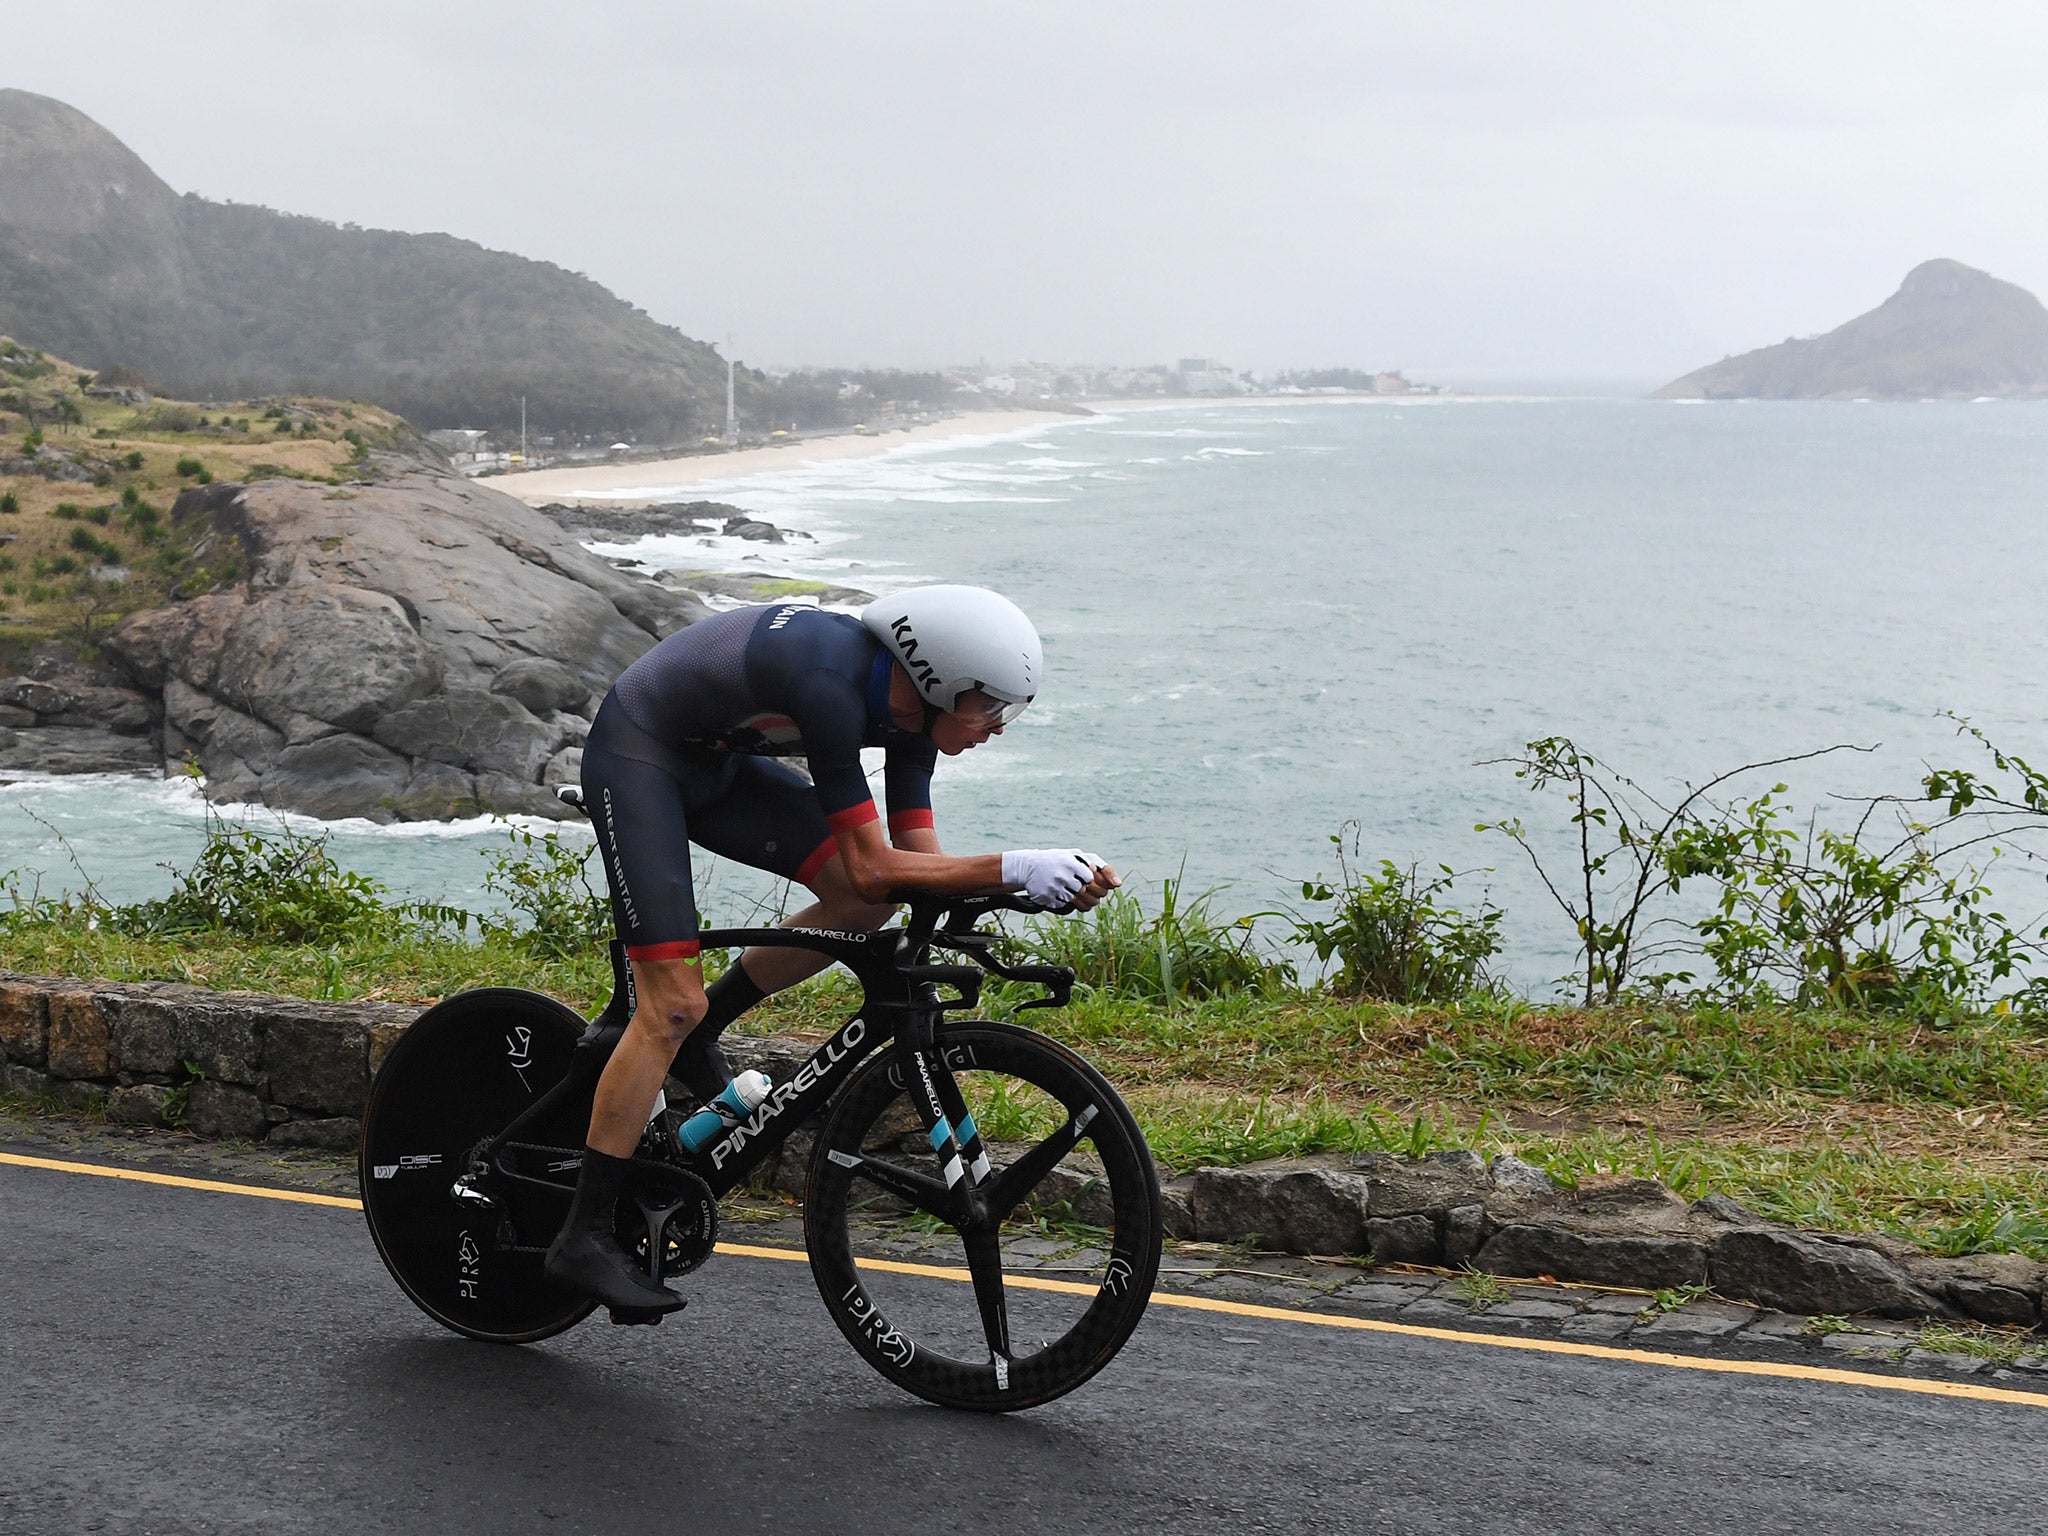 Chris Froome won bronze in the men's time trial for the second consecutive Olympics